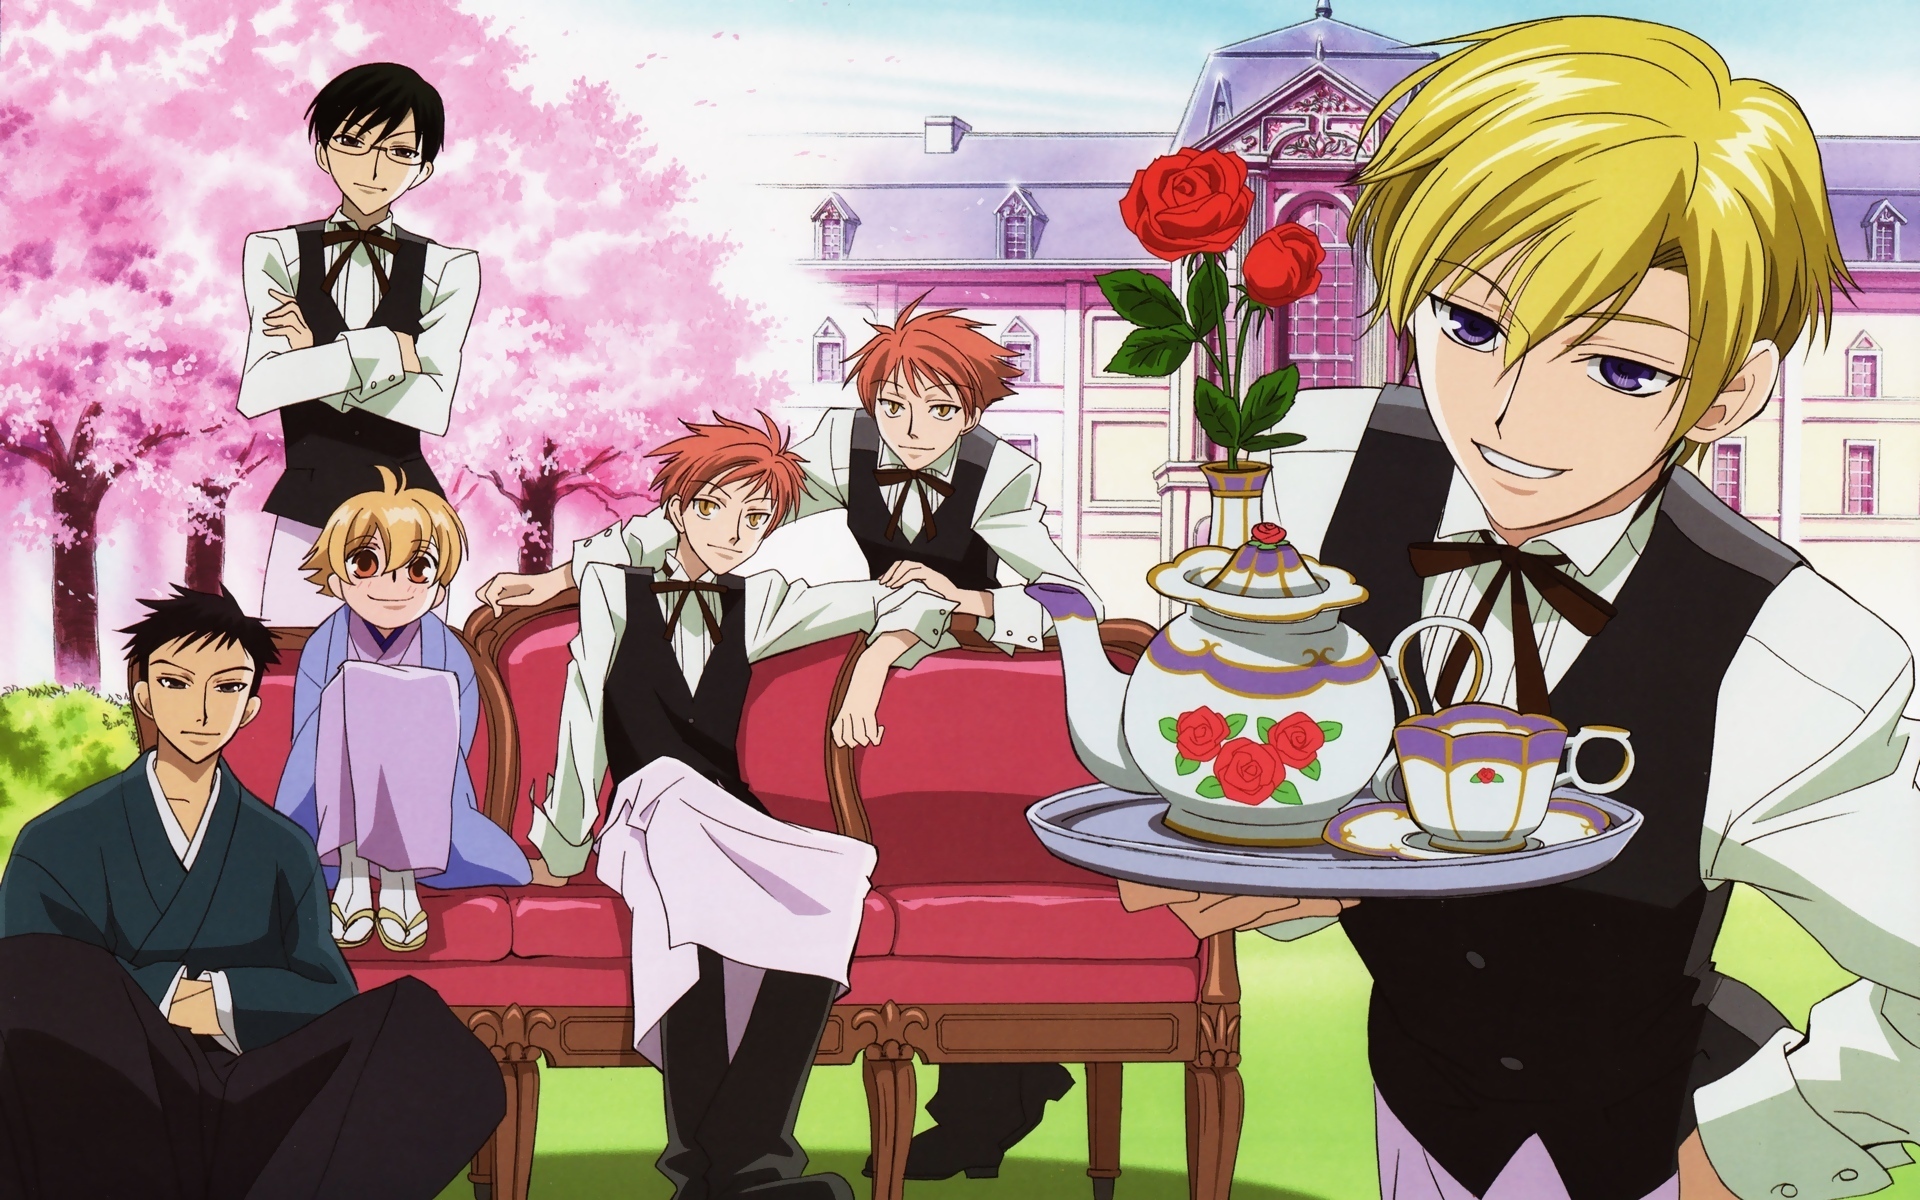 HD wallpaper featuring characters from Ouran High School Host Club with a cherry blossom backdrop.